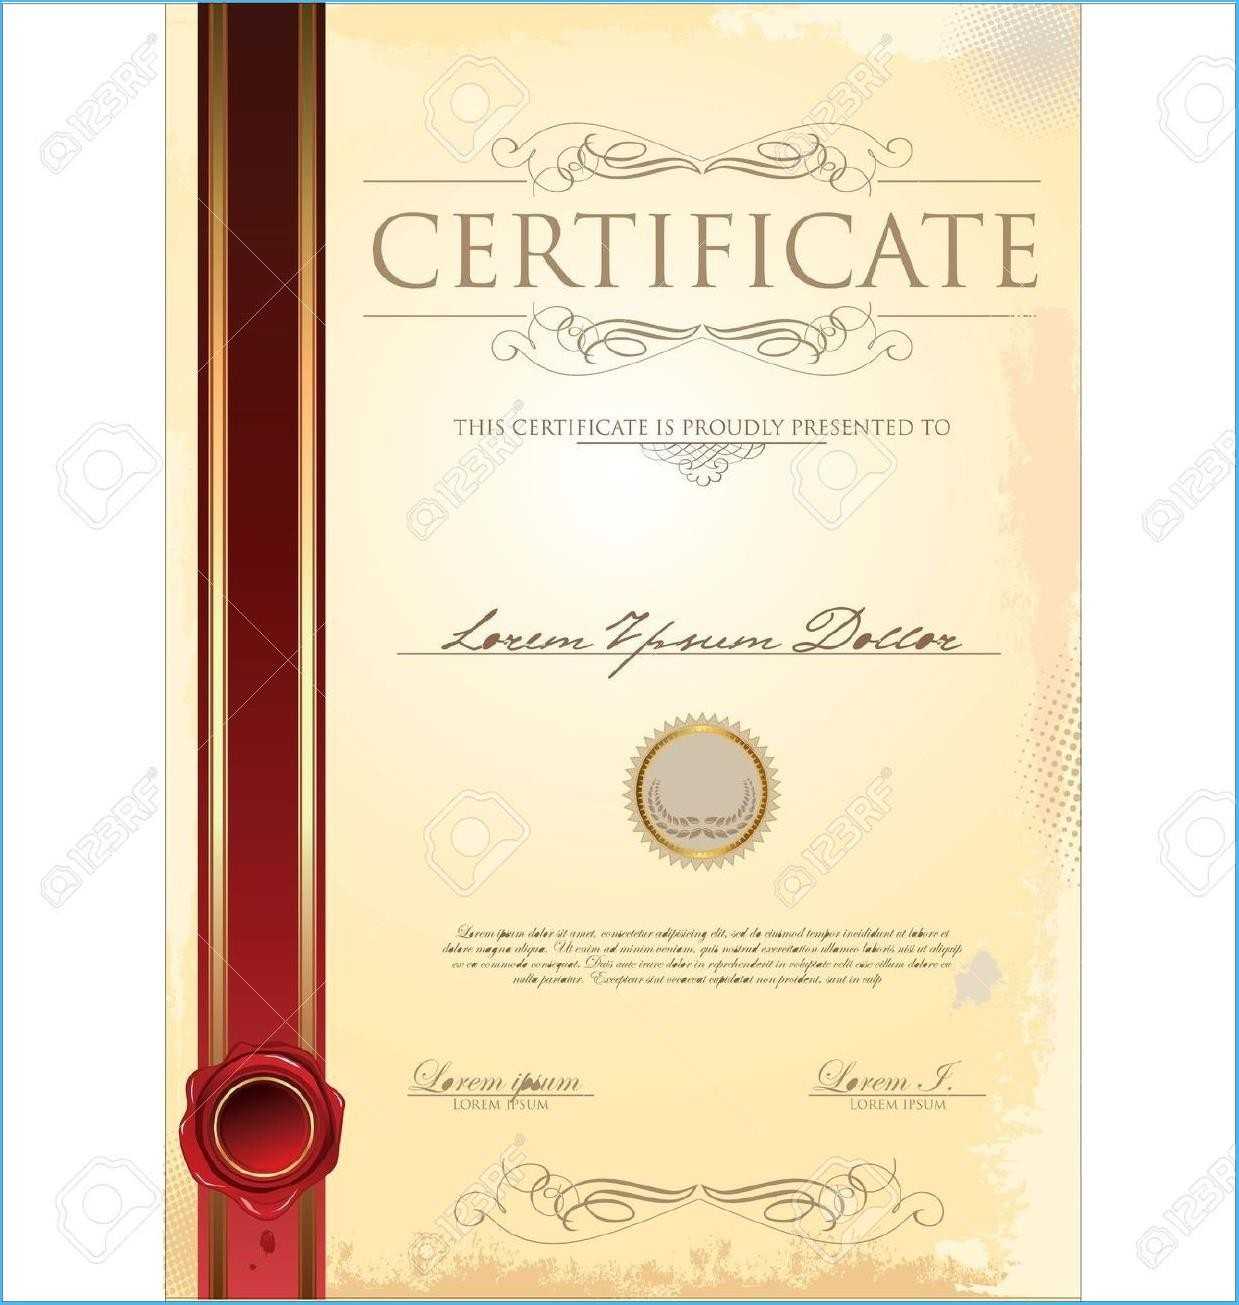 Certificate Scroll Template #8990 With Regard To Scroll Certificate Templates